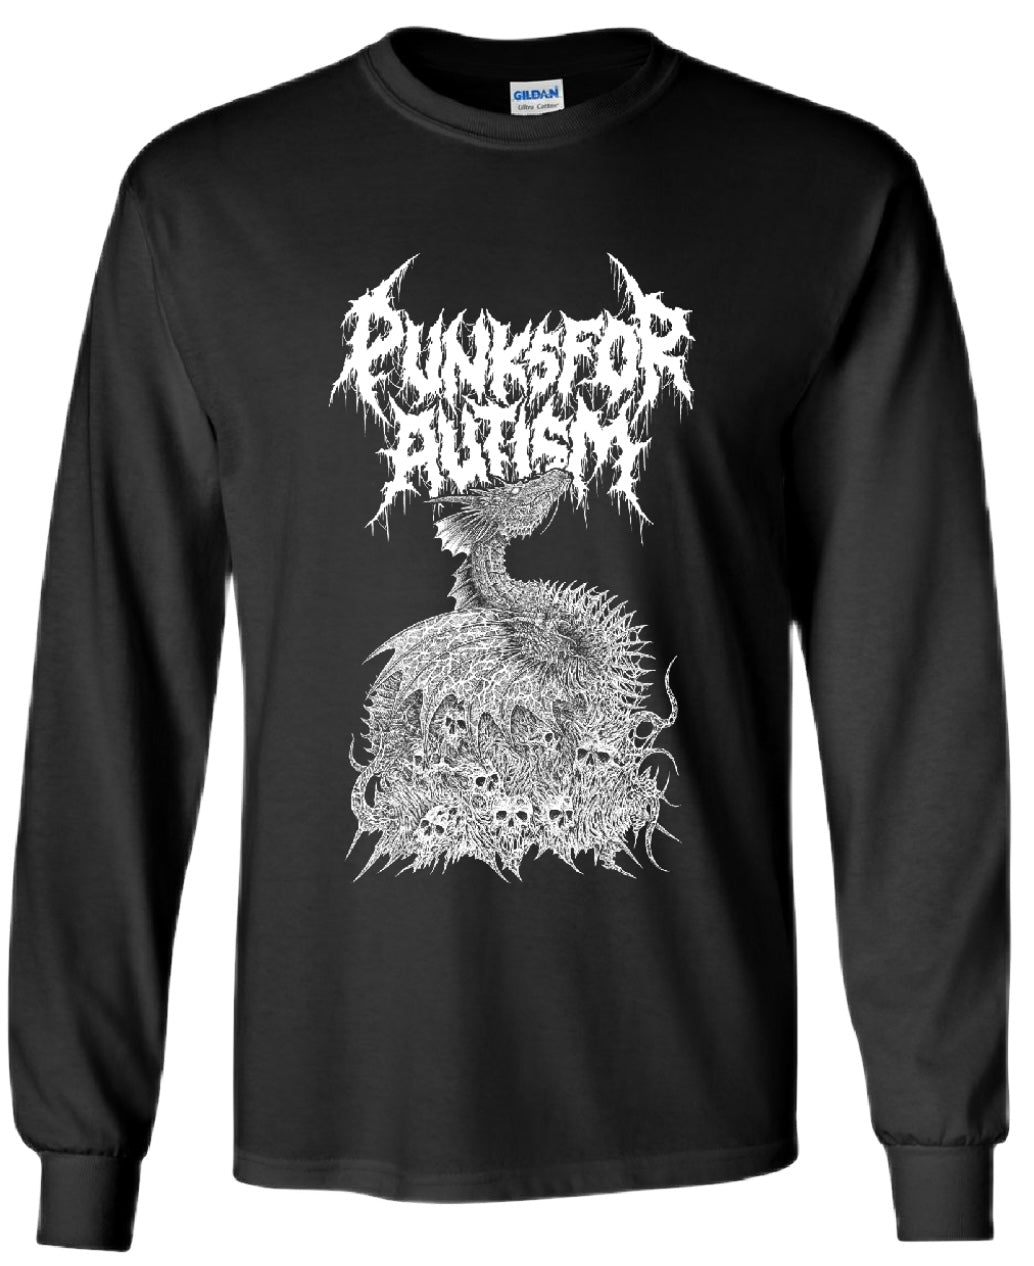 Punks for Autism - Death Metal - Long Sleeve